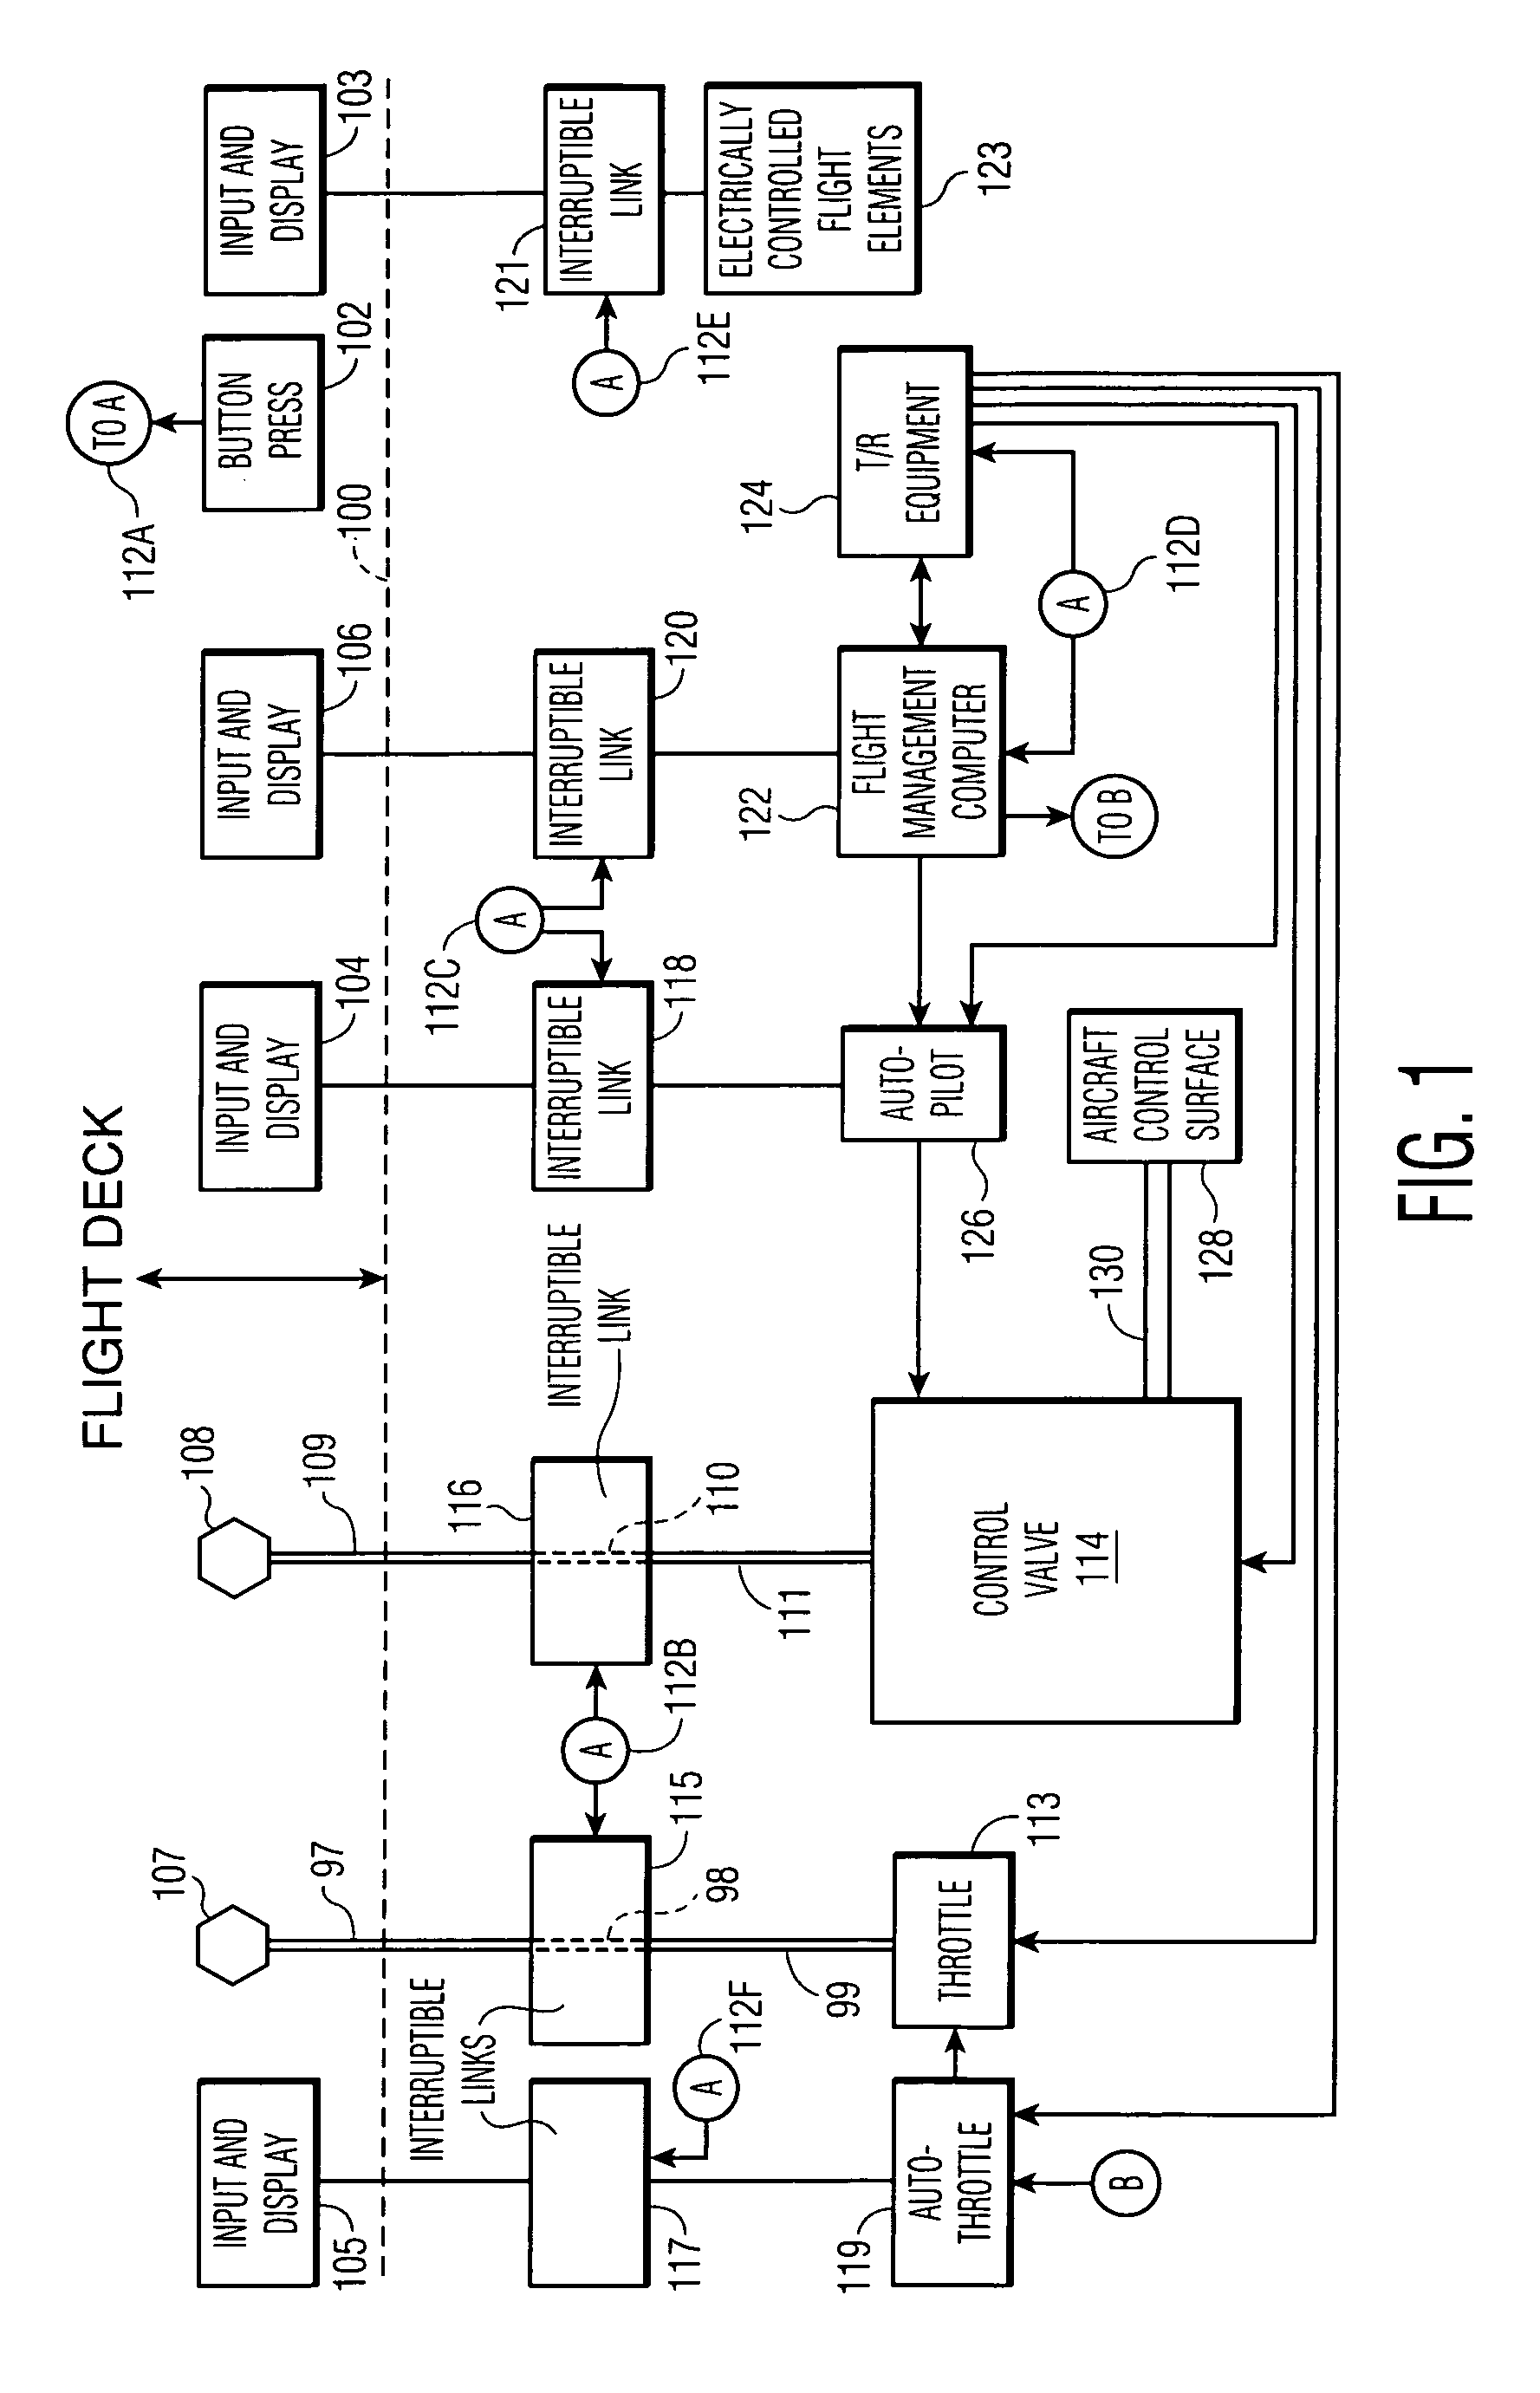 Method and apparatus for disabling pilot control of a hijacked aircraft